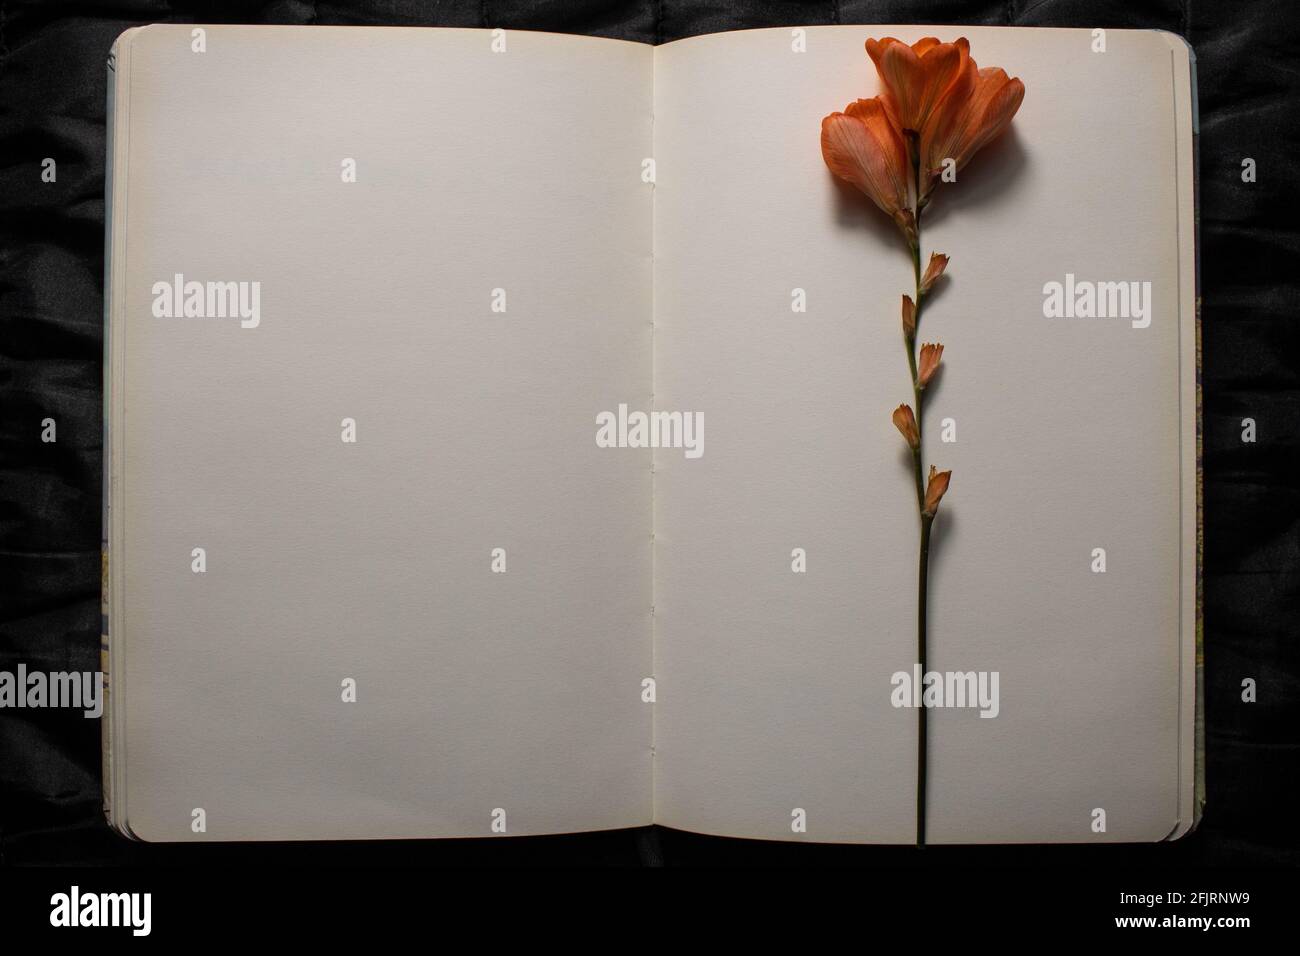 Top view of open book with orange freesia flower resting on top of empty blank pages on a black textured background. Empty space for text Stock Photo